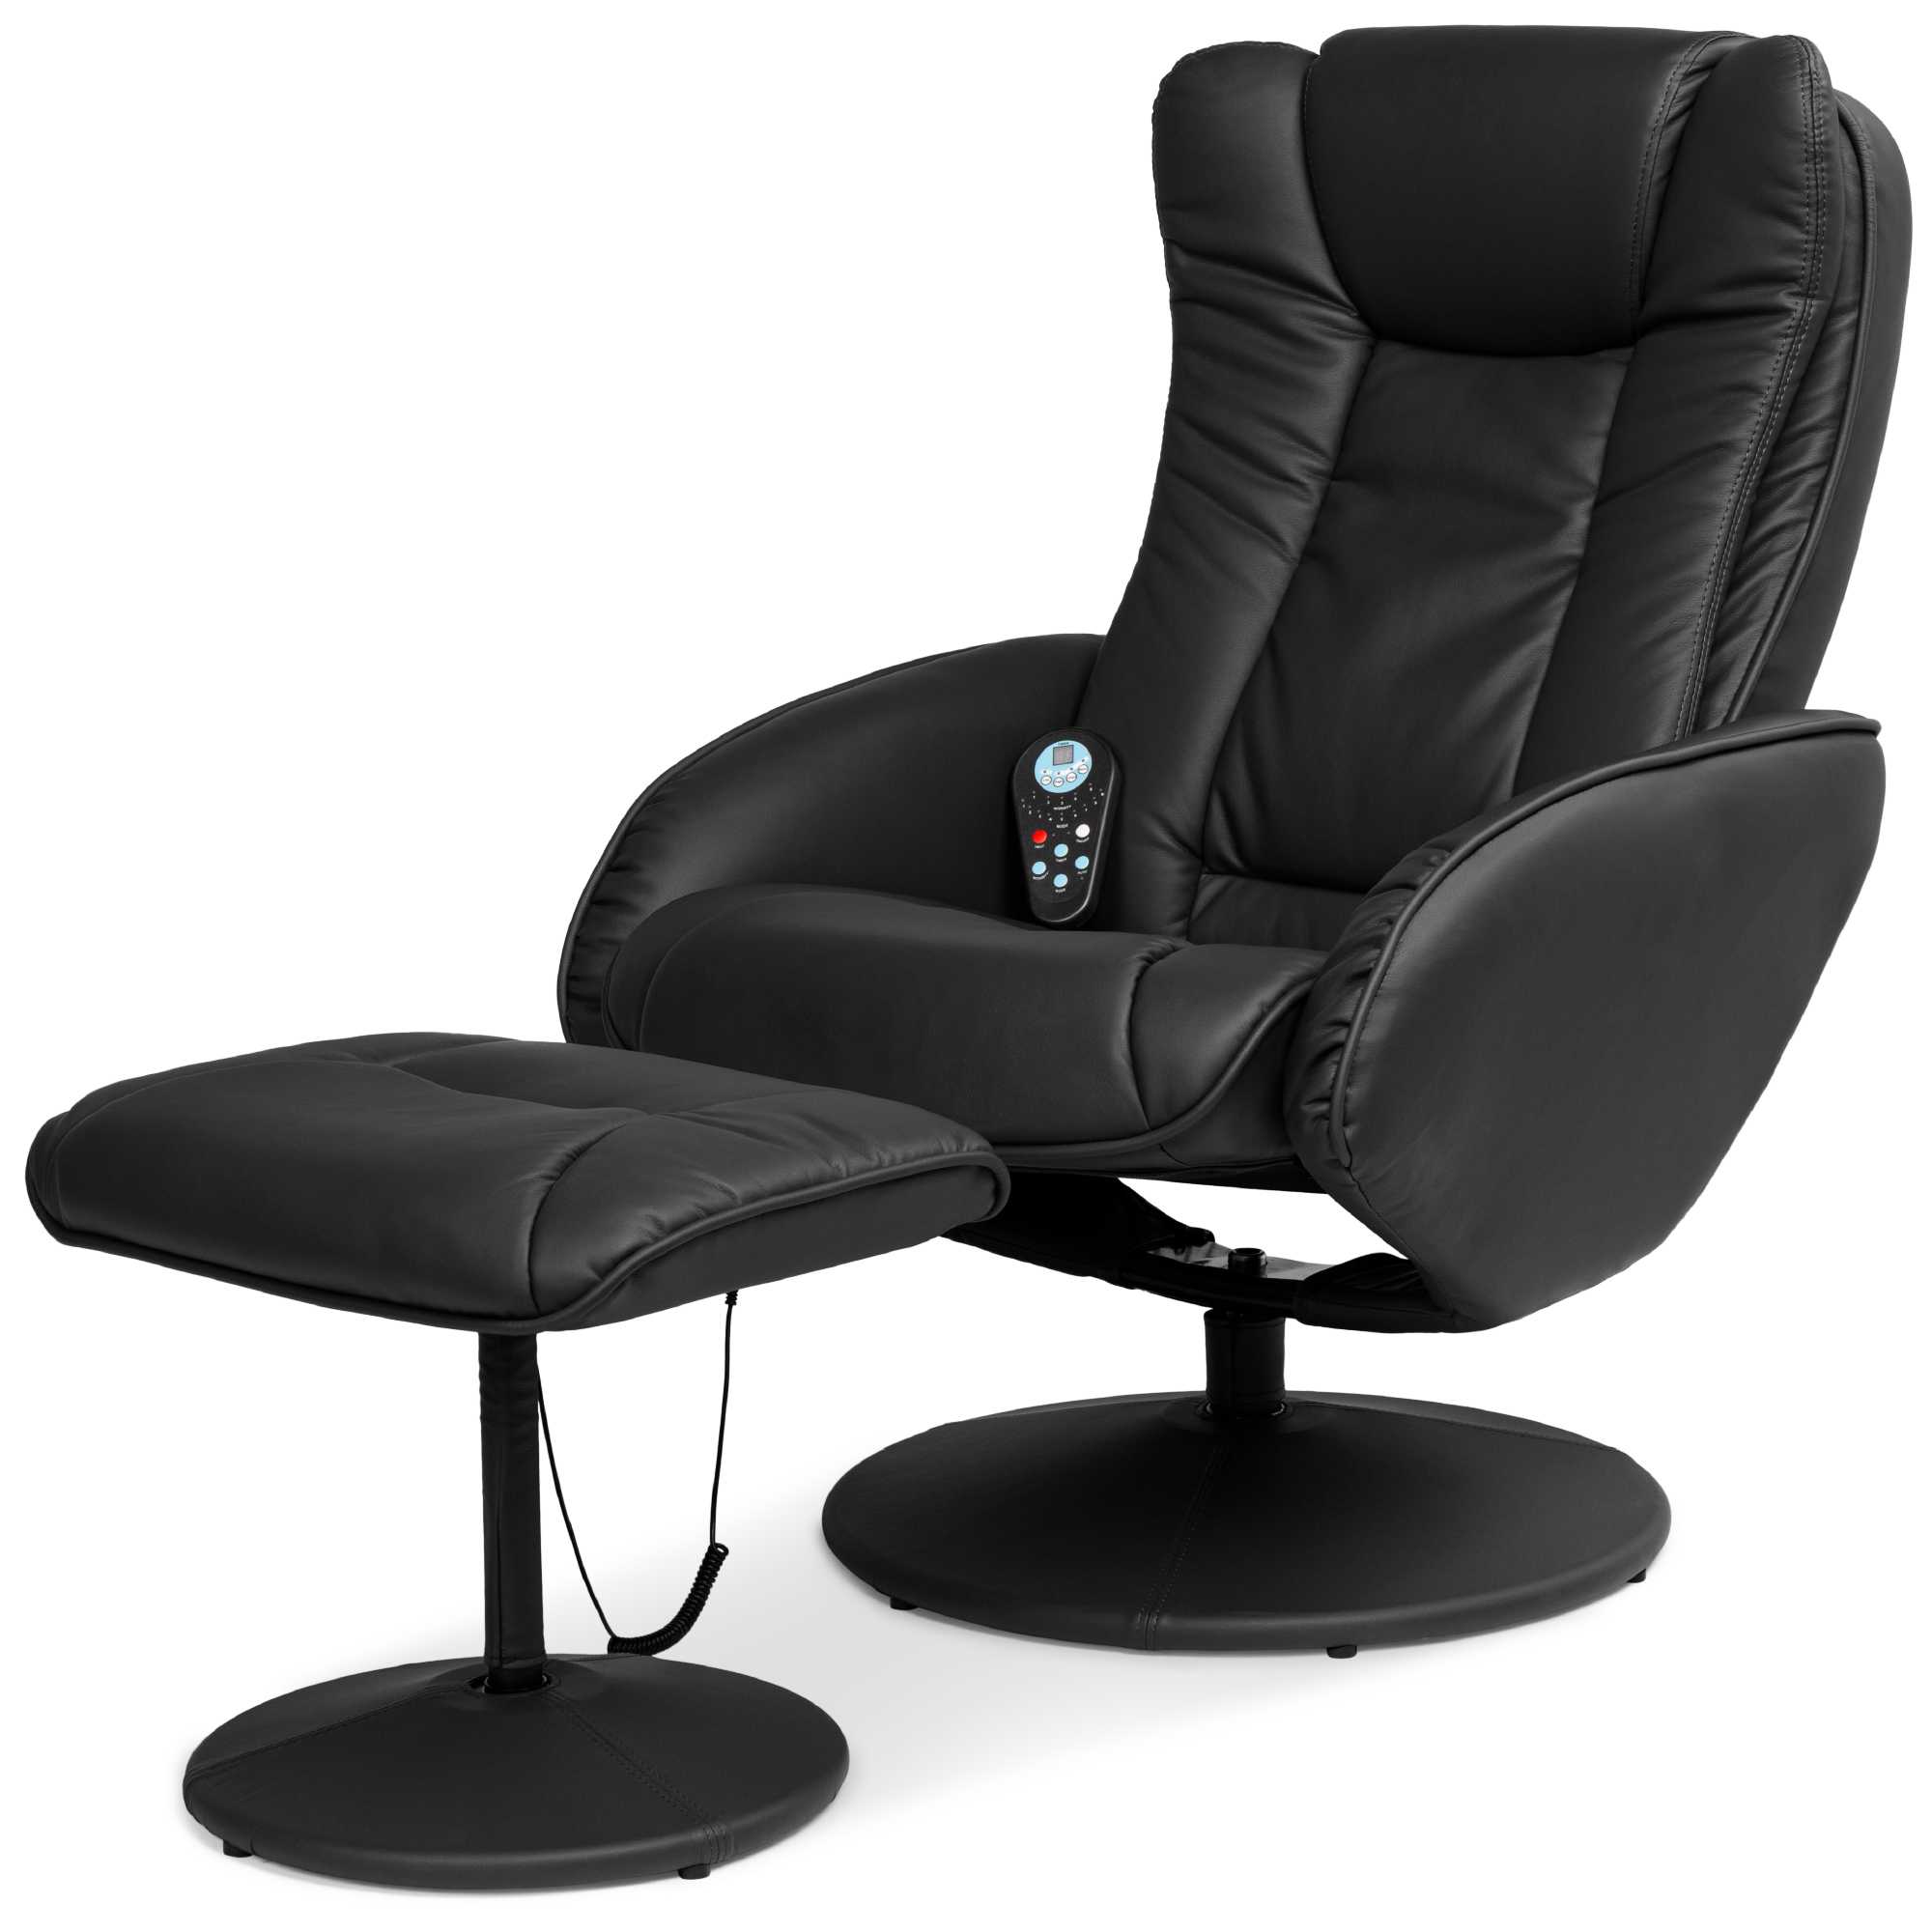 Electric Massage Recliner Chair, Faux Leather w/ Stool Ottoman, 5 Heat & Massage Modes, Remote Control, Side Pockets - Black